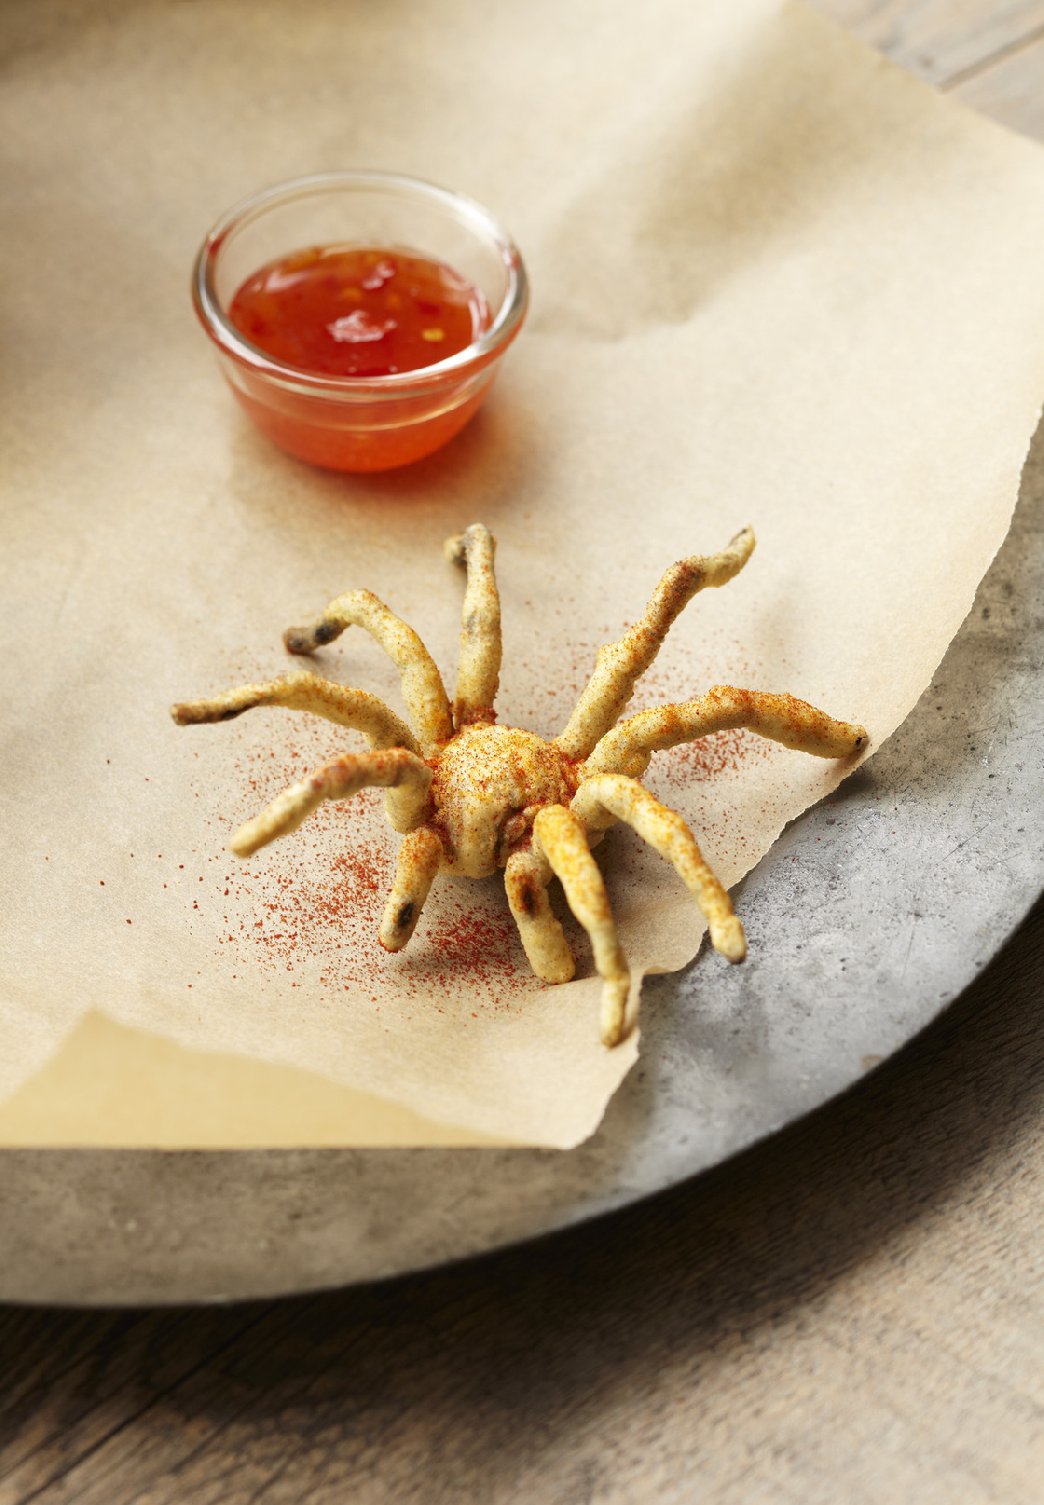 Gordon recommends dusting the deep-fried tarantula spider with smoked paprika. Photo: Chugrad McAndrews/Reprinted with permission from The Eat-A-Bug Cookbook